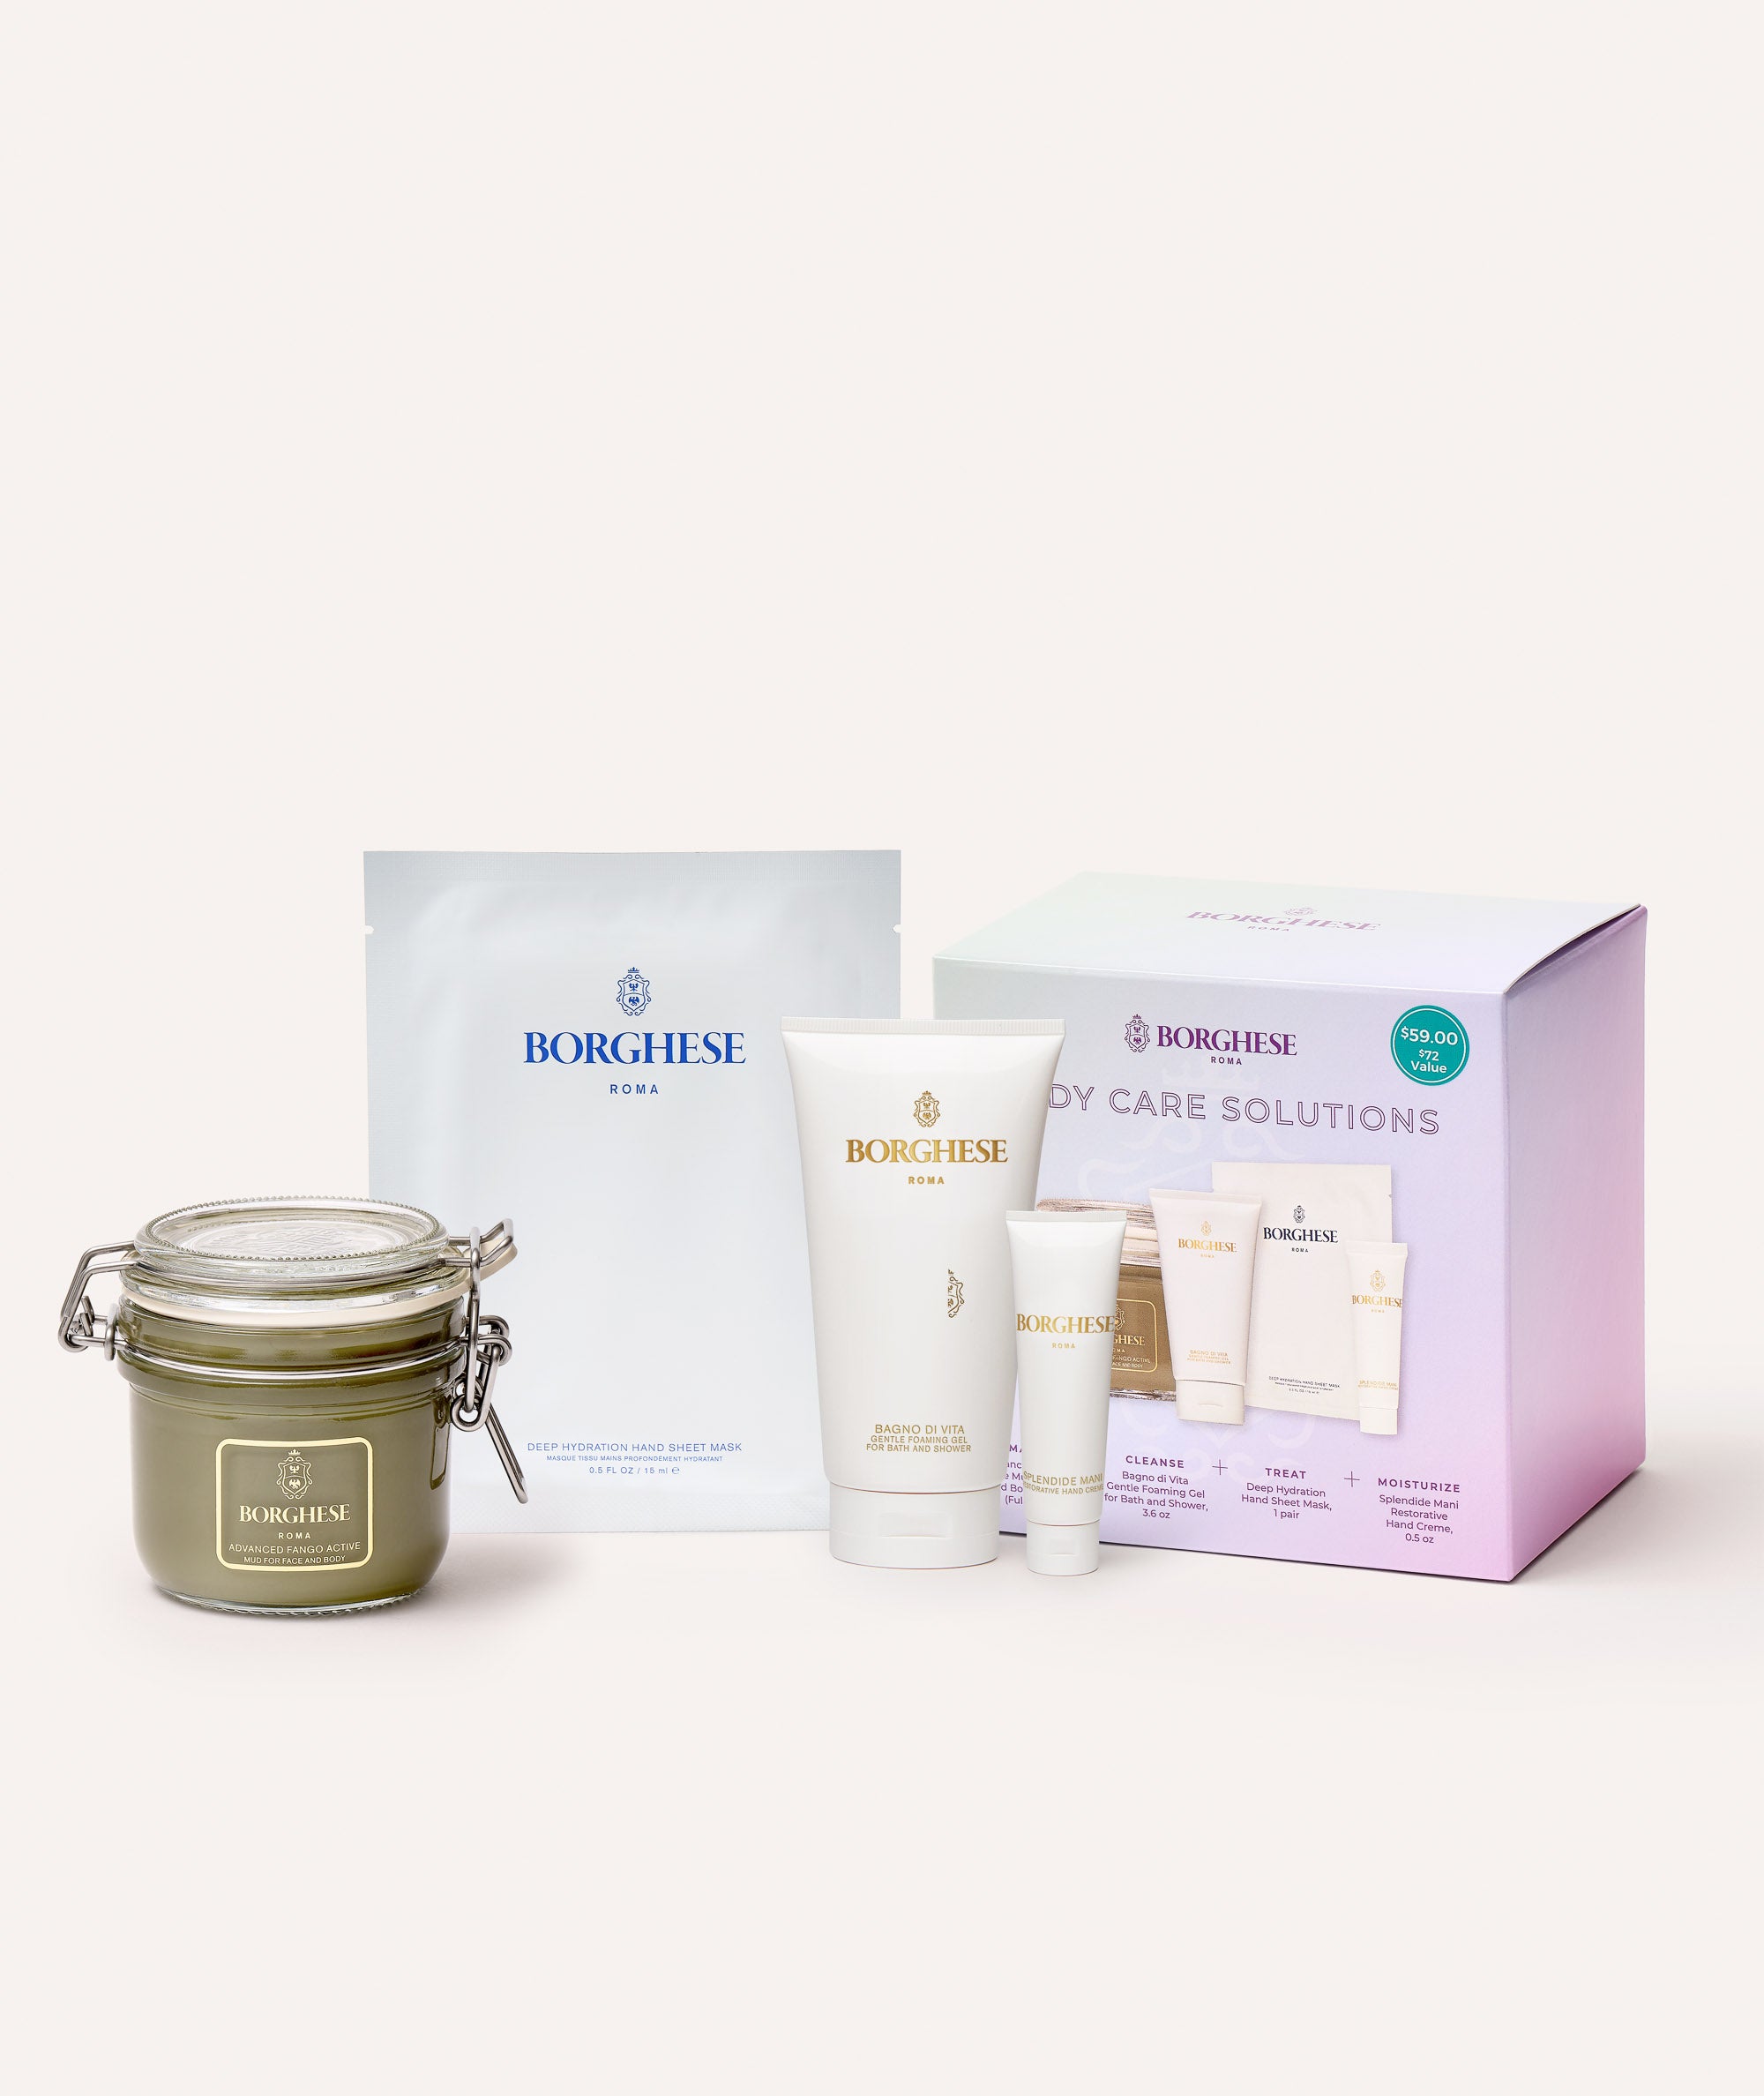 This is a picture of the contents and gift box of the Borghese 4 piece Body Care Solutions Gift Set